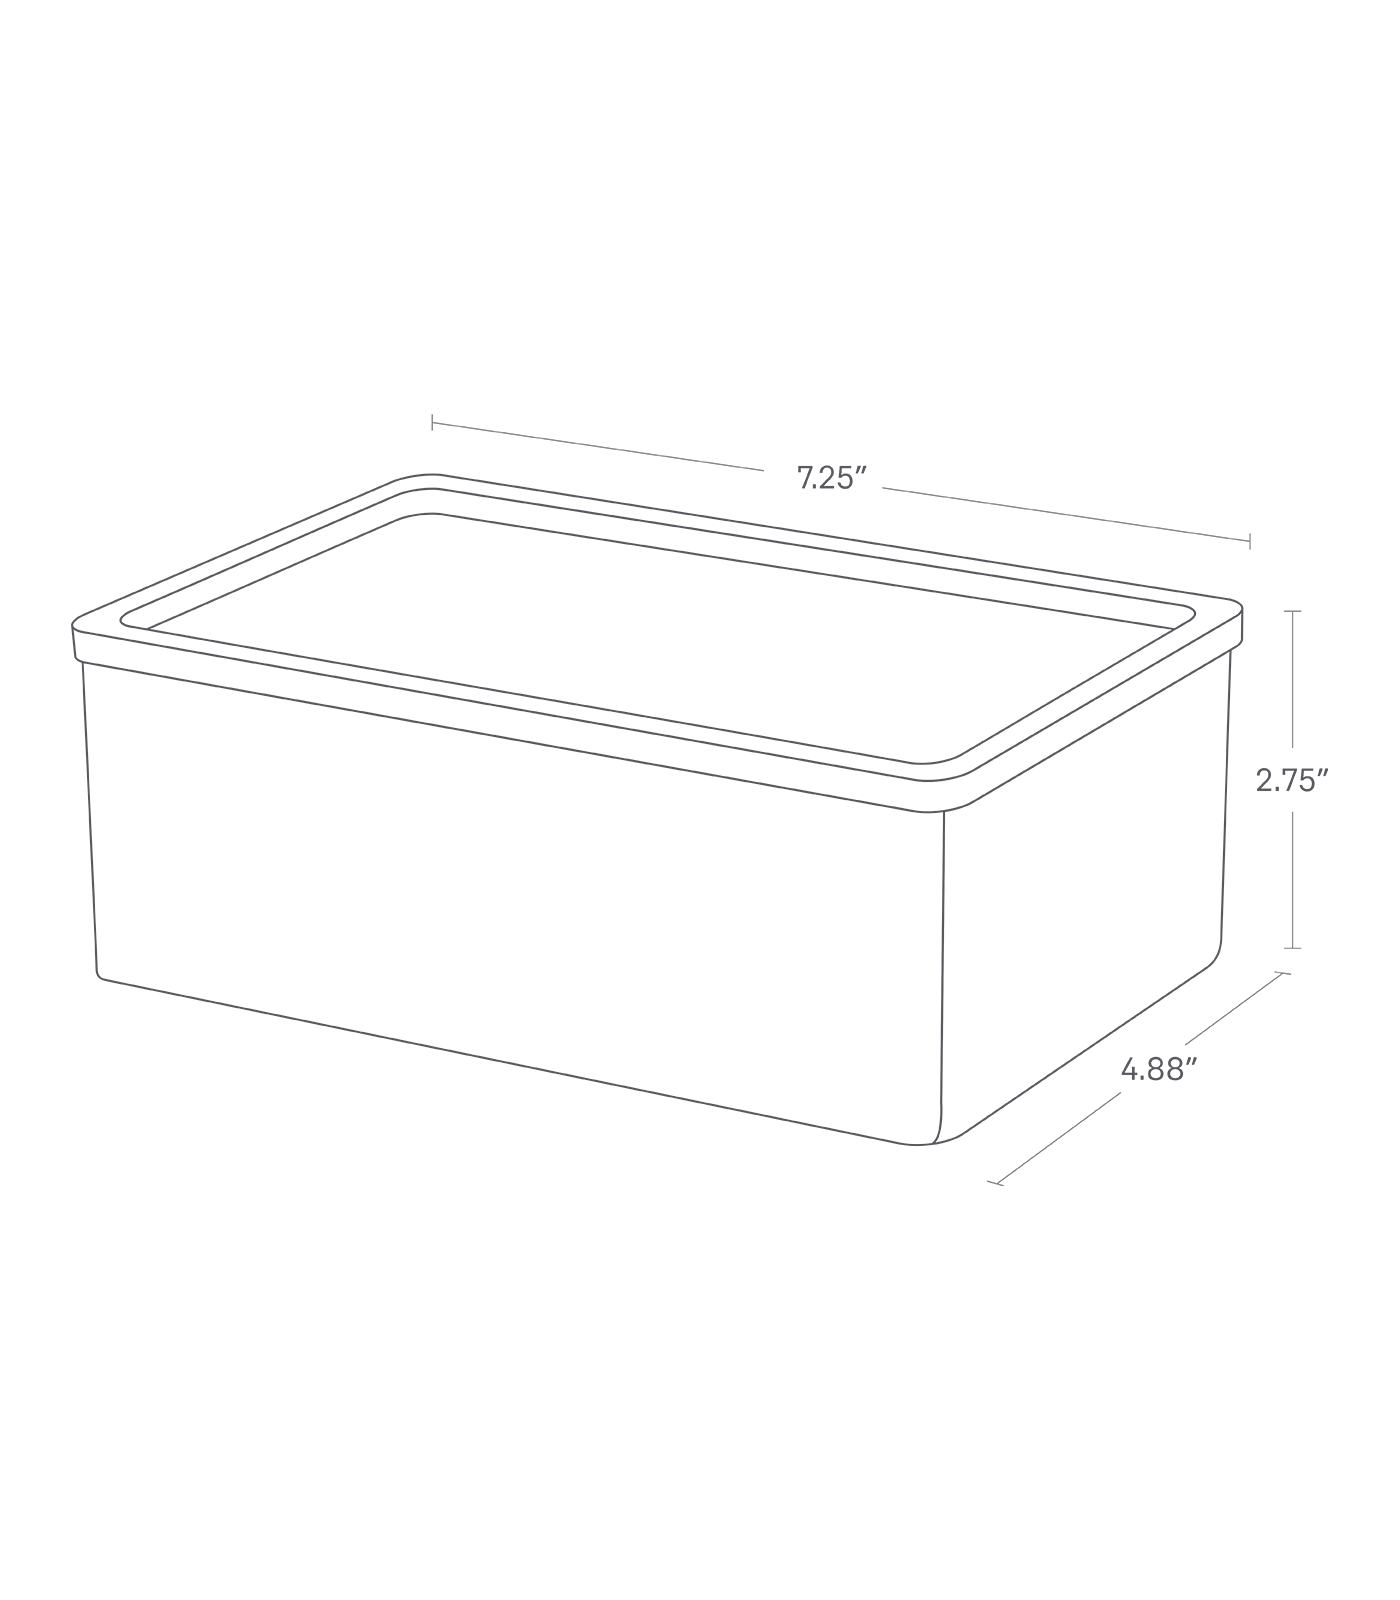 Dimension image for Accessory Box on a white background including dimensions  L 4.92 x W 7.28 x H 2.76 inches